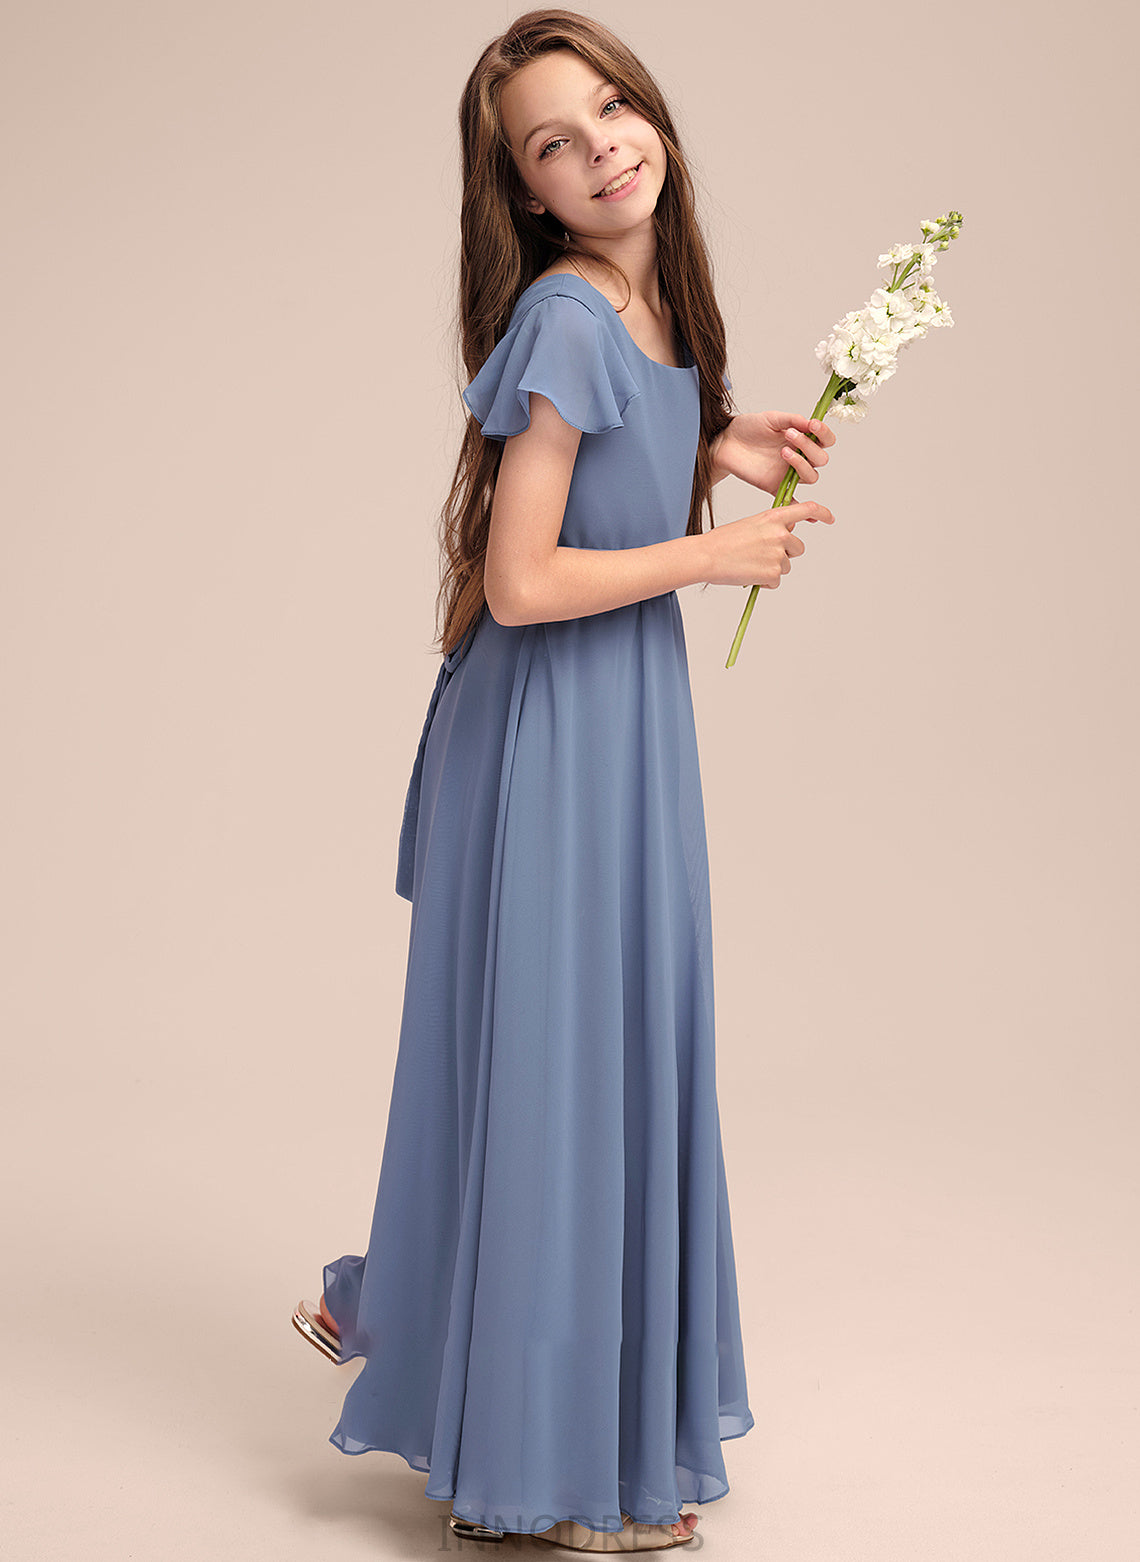 Junior Bridesmaid Dresses A-Line Scoop Neck With Chiffon Chasity Floor-Length Bow(s)